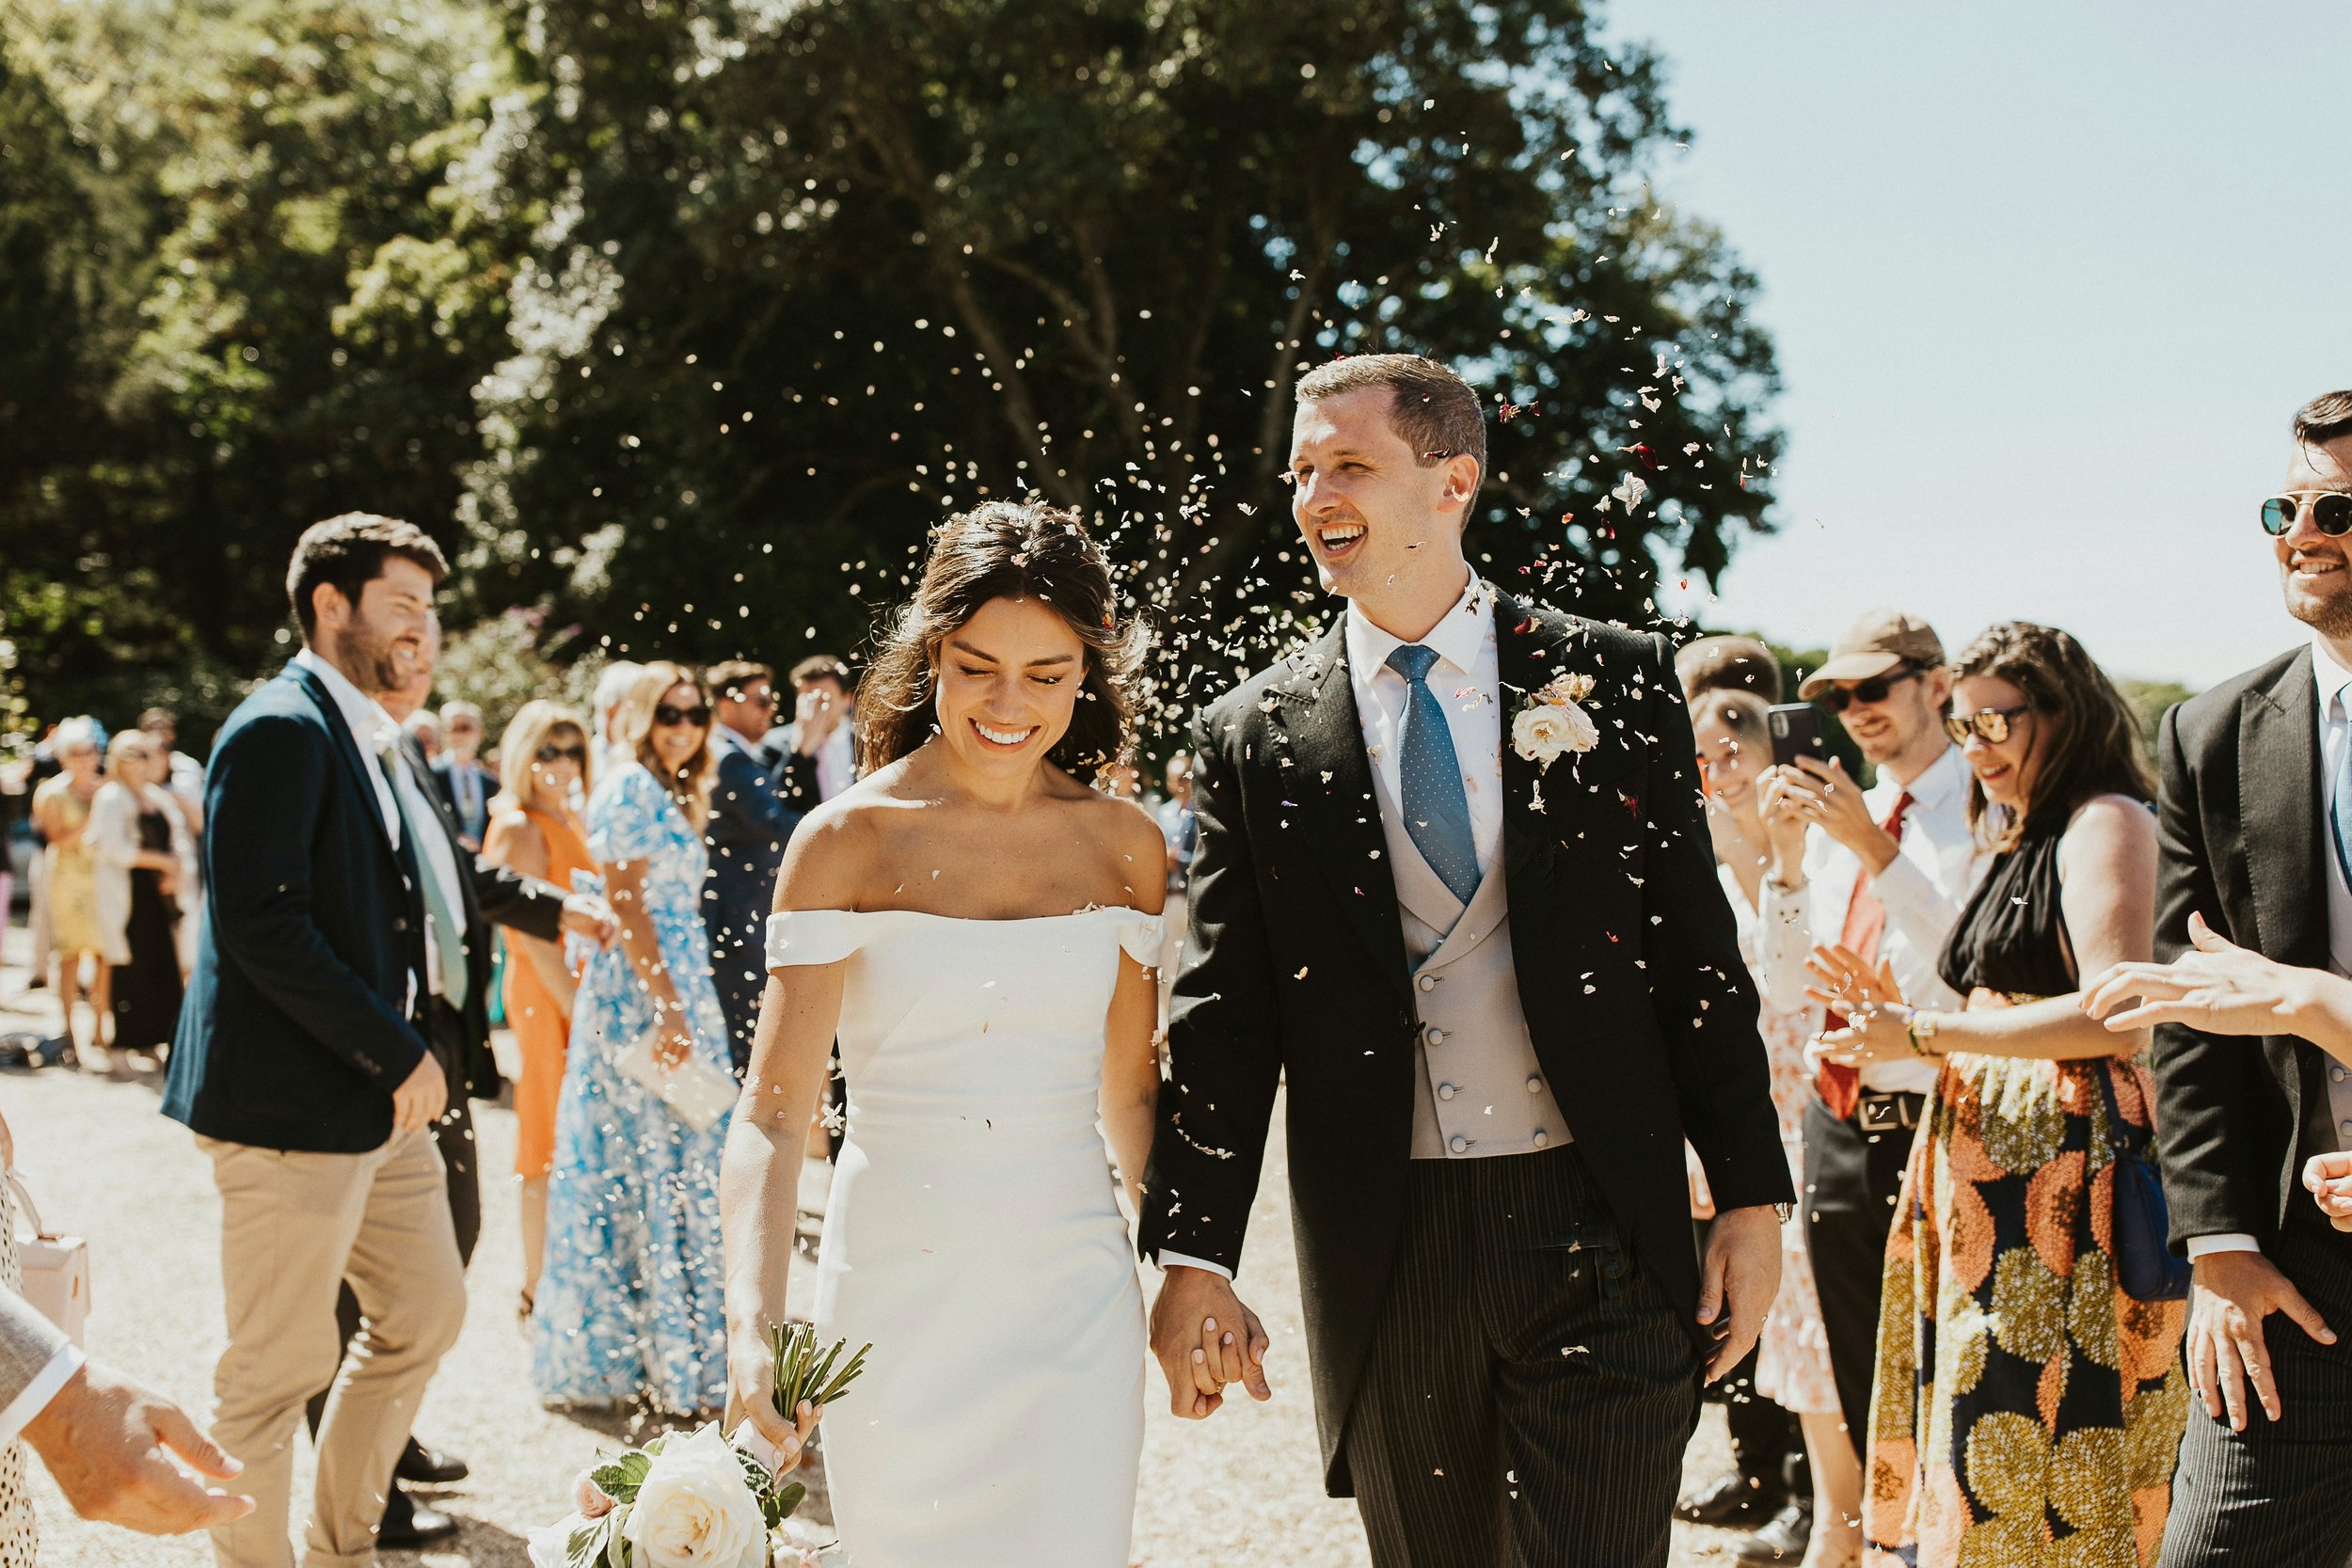 Beautiful bride Holly wore the Harbour wedding dress by Halfpenny London